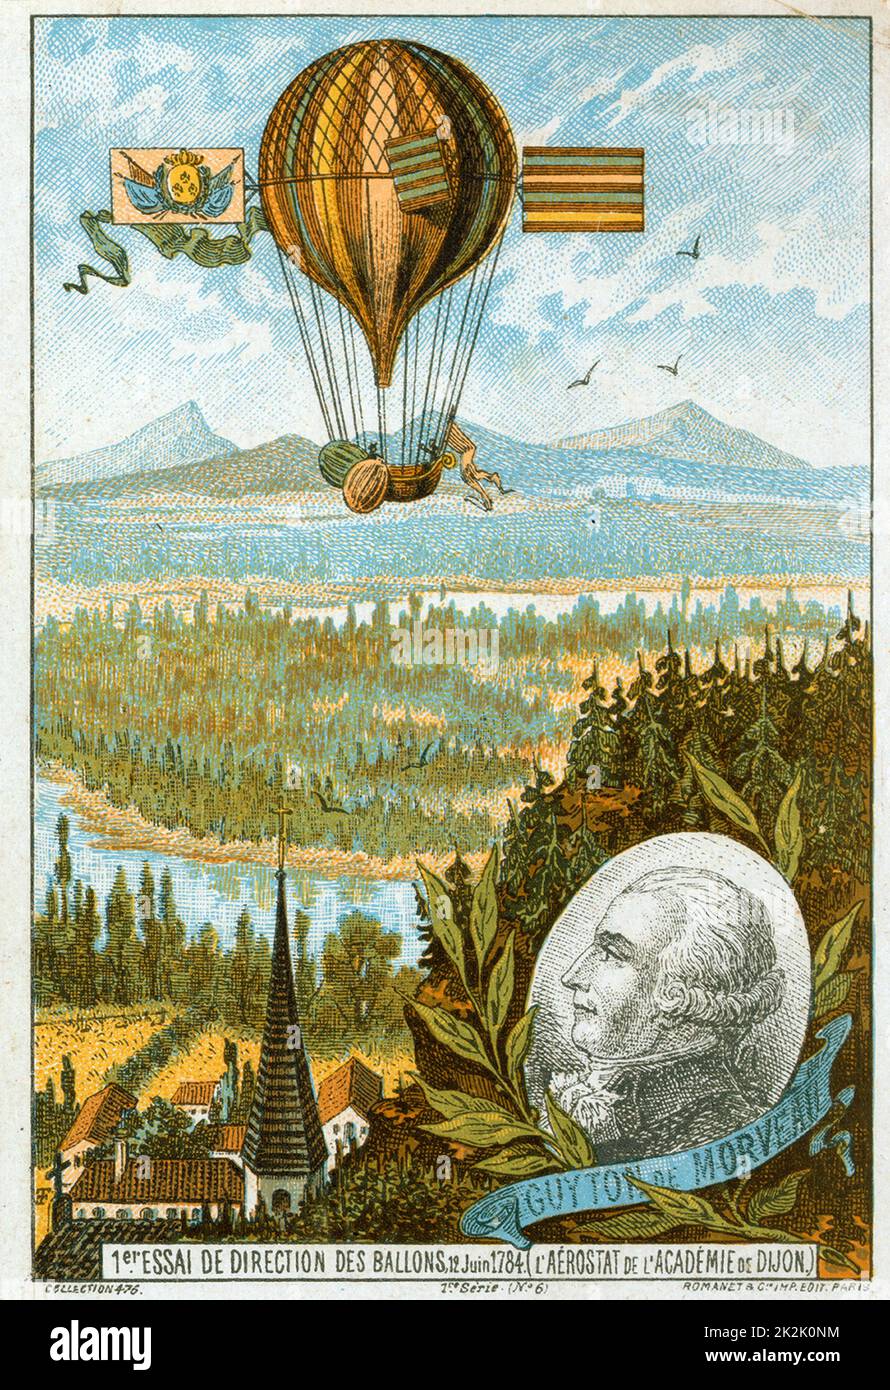 Guiton de Morveau (1737-1816) French chemist, making the first flight in a dirigible (steerable) balloon, 12 June 1784. Chromolithograph c1883. Aeronautics Aviation Ballooning Flying Stock Photo